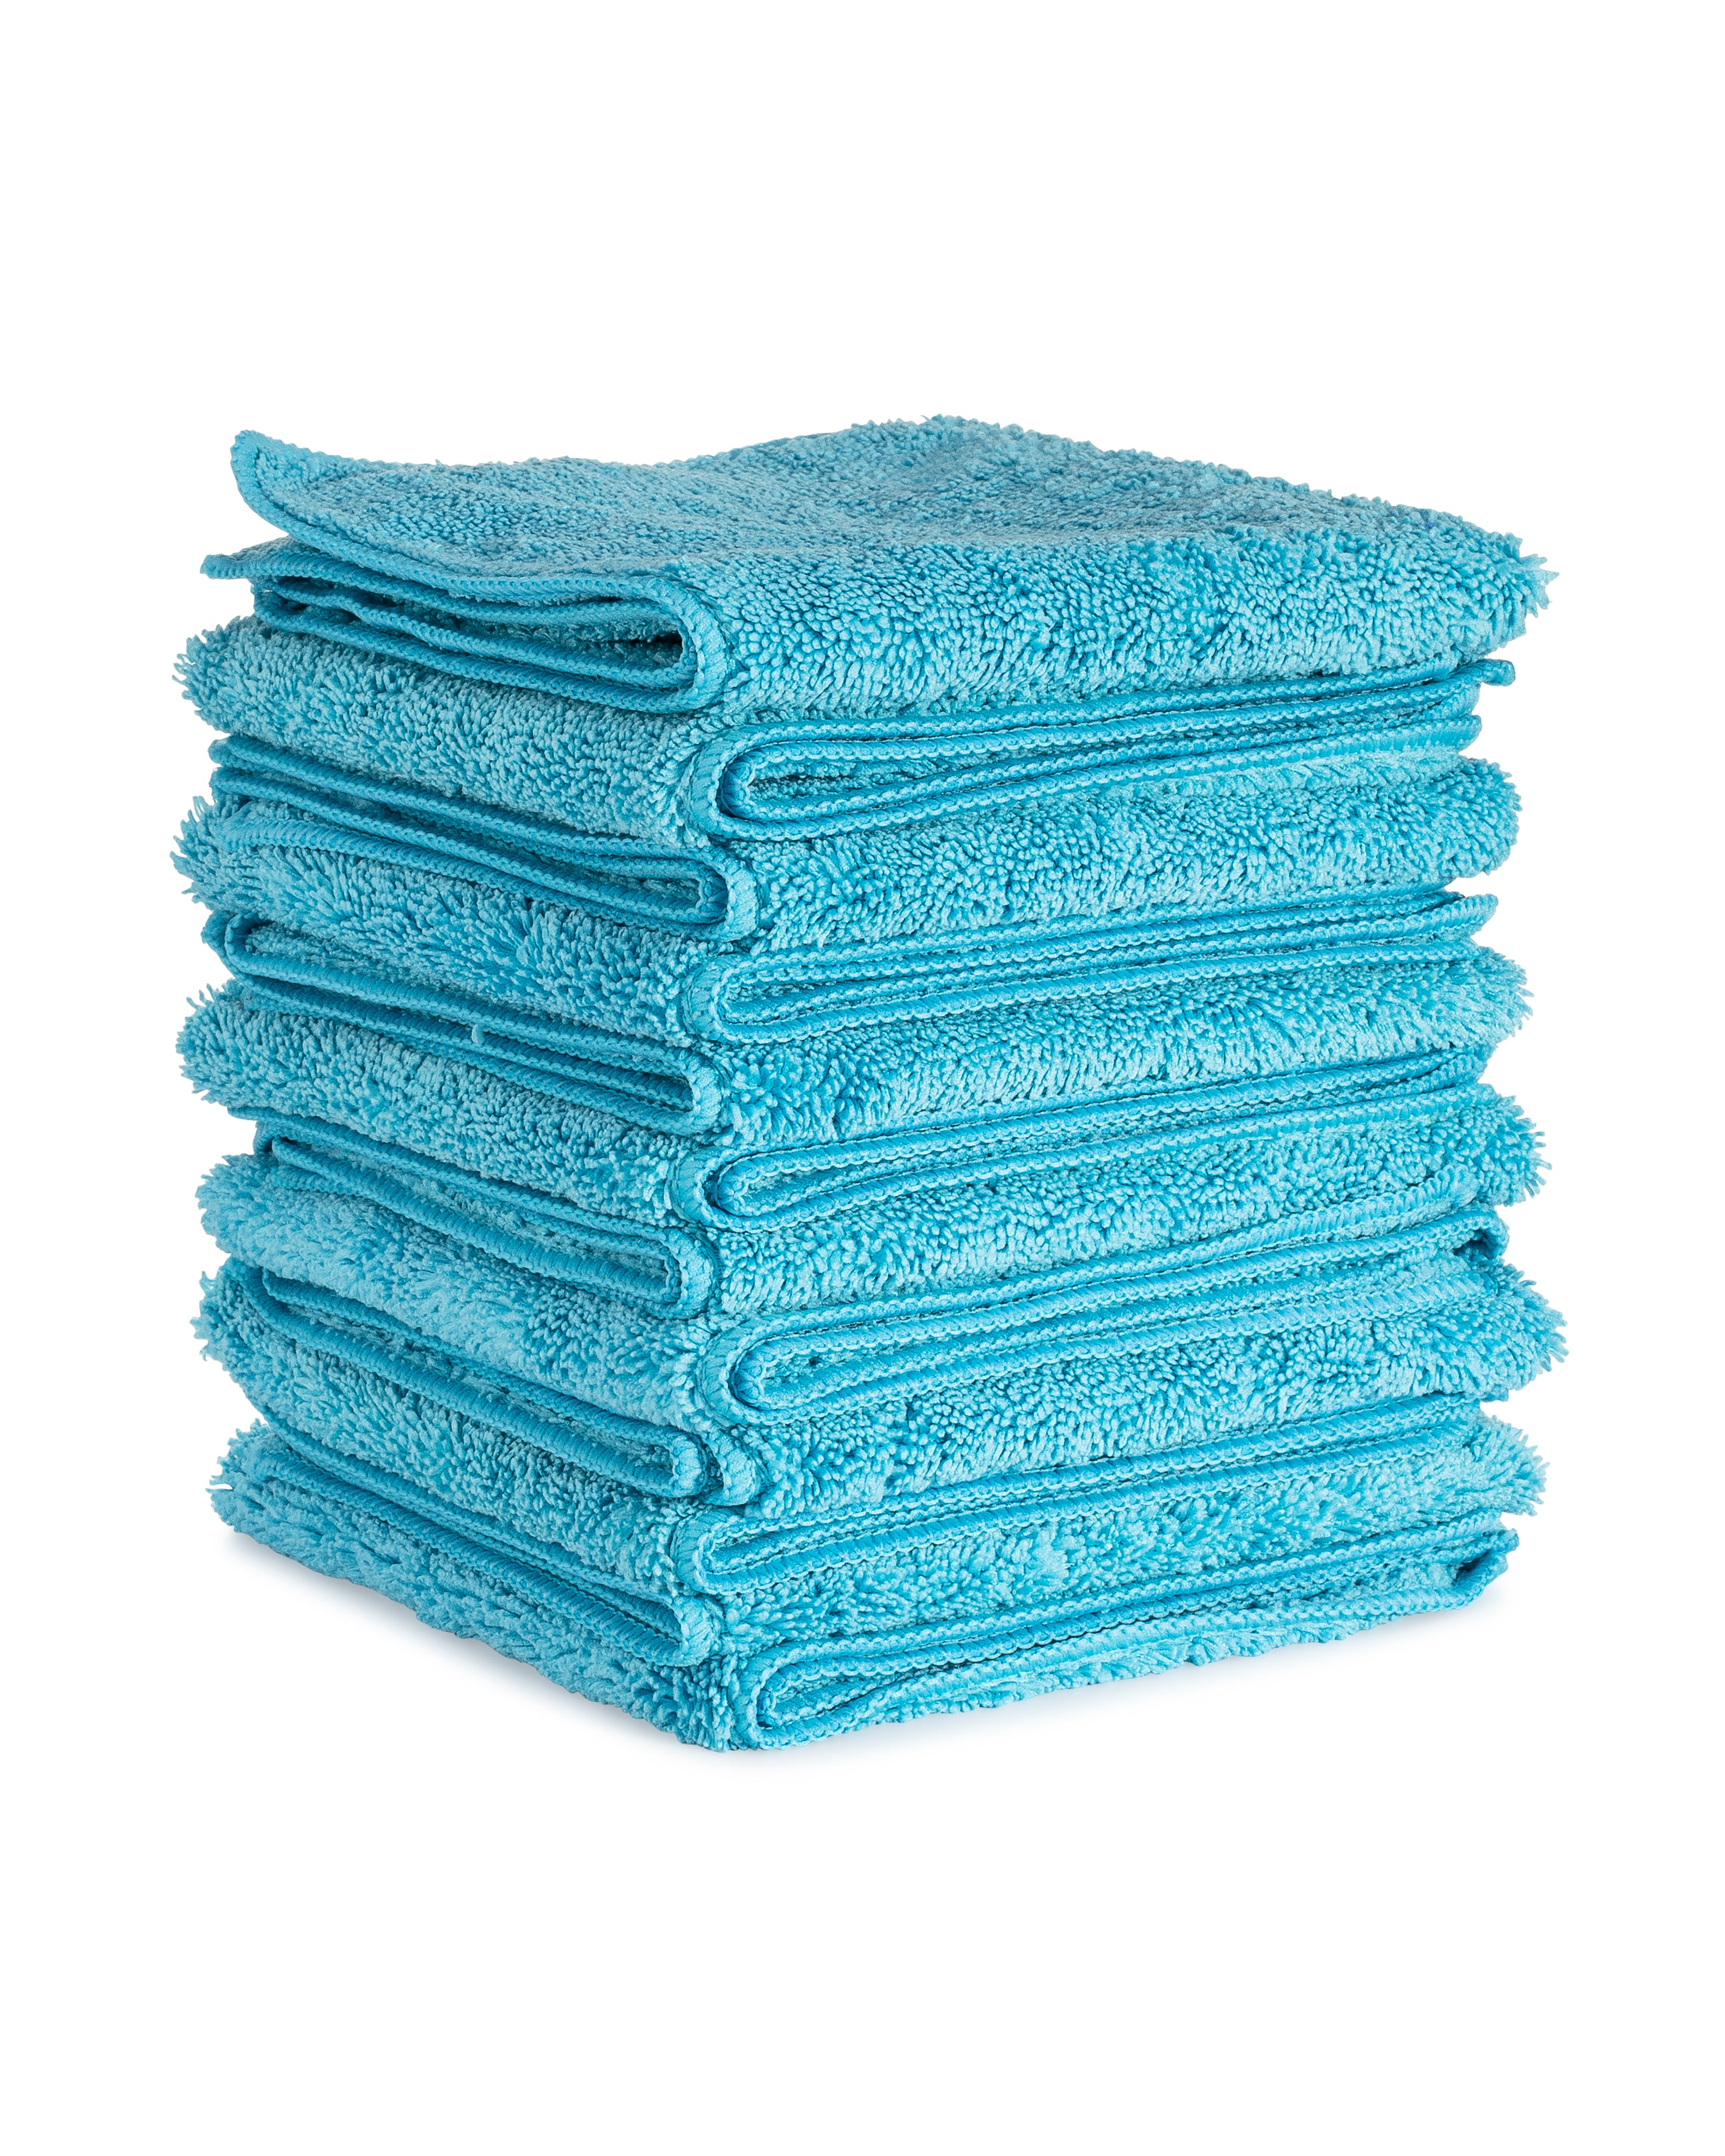 Microfiber Towels: Choose the Right One for Your Next Trip